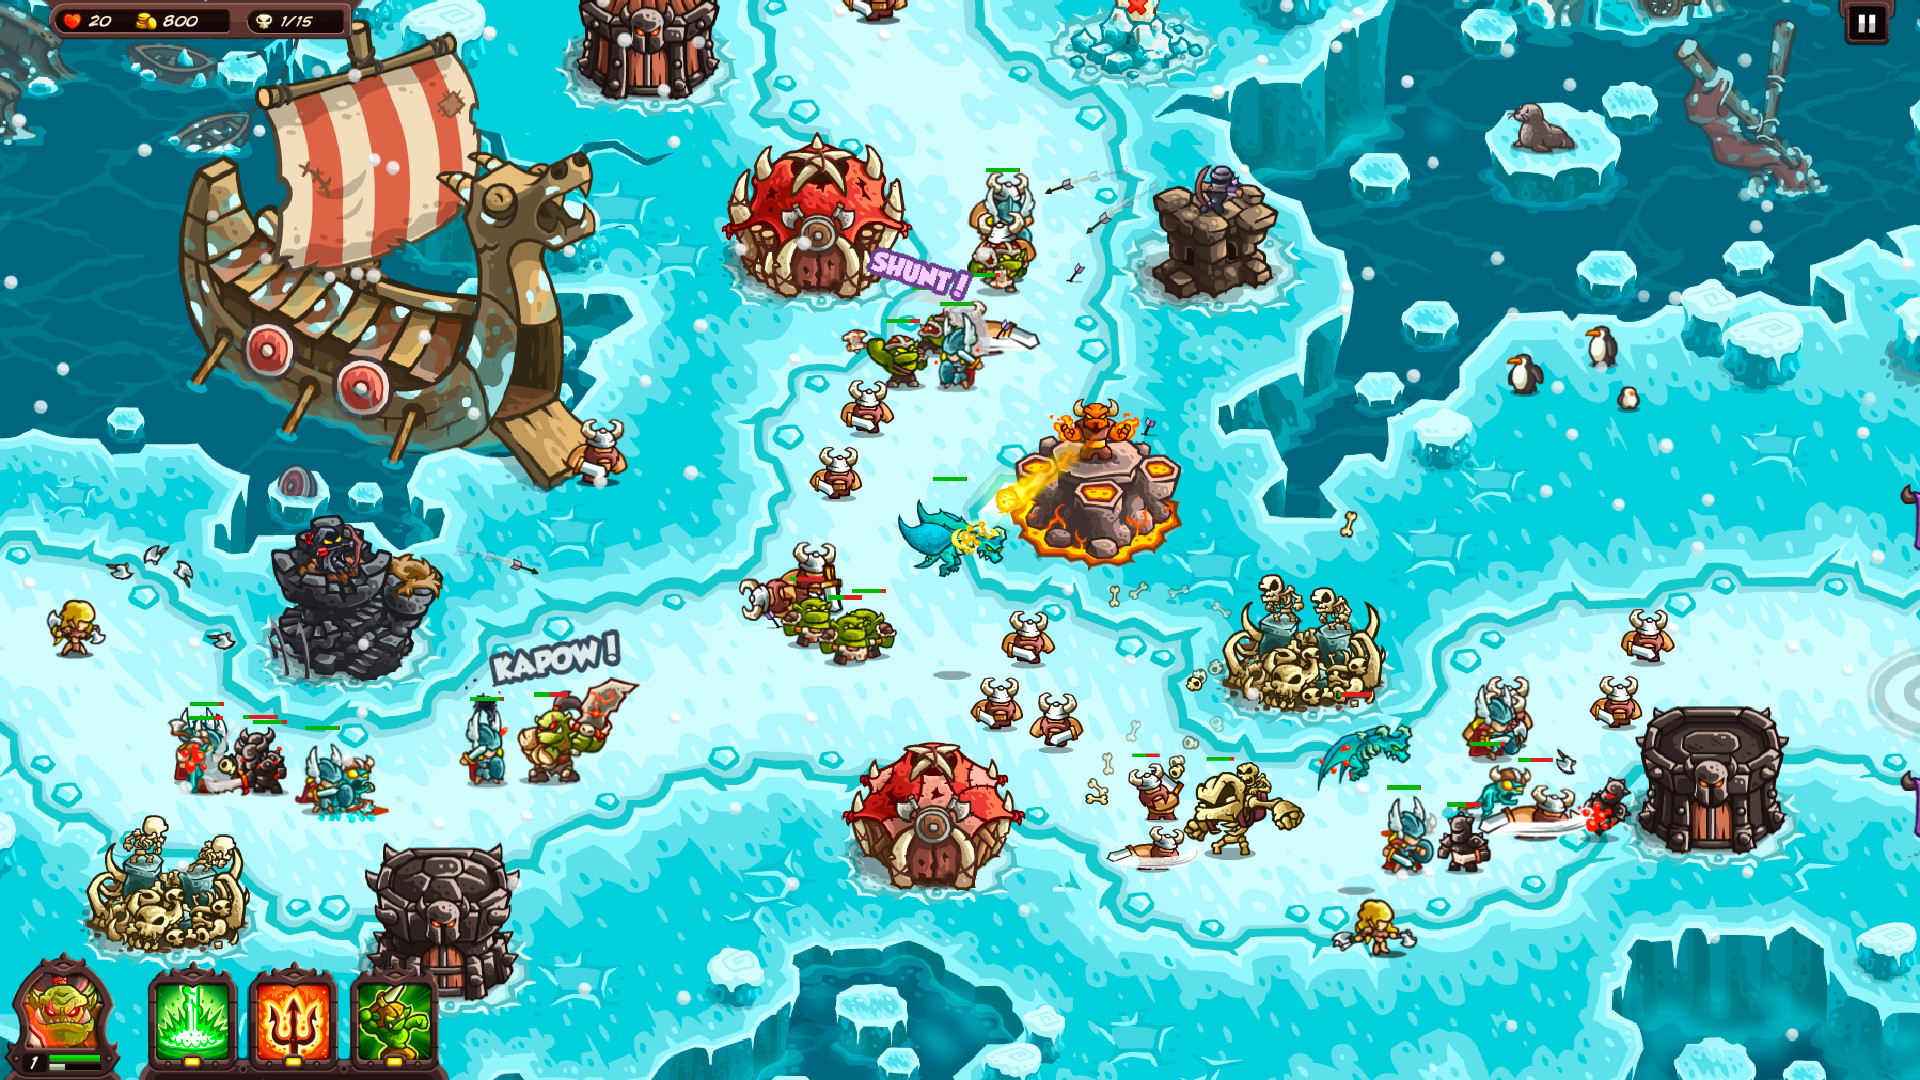 Best Tower Defense Game: A group of monsters and Vikings fight in the Arctic in Kingdom Rush Vengeance.